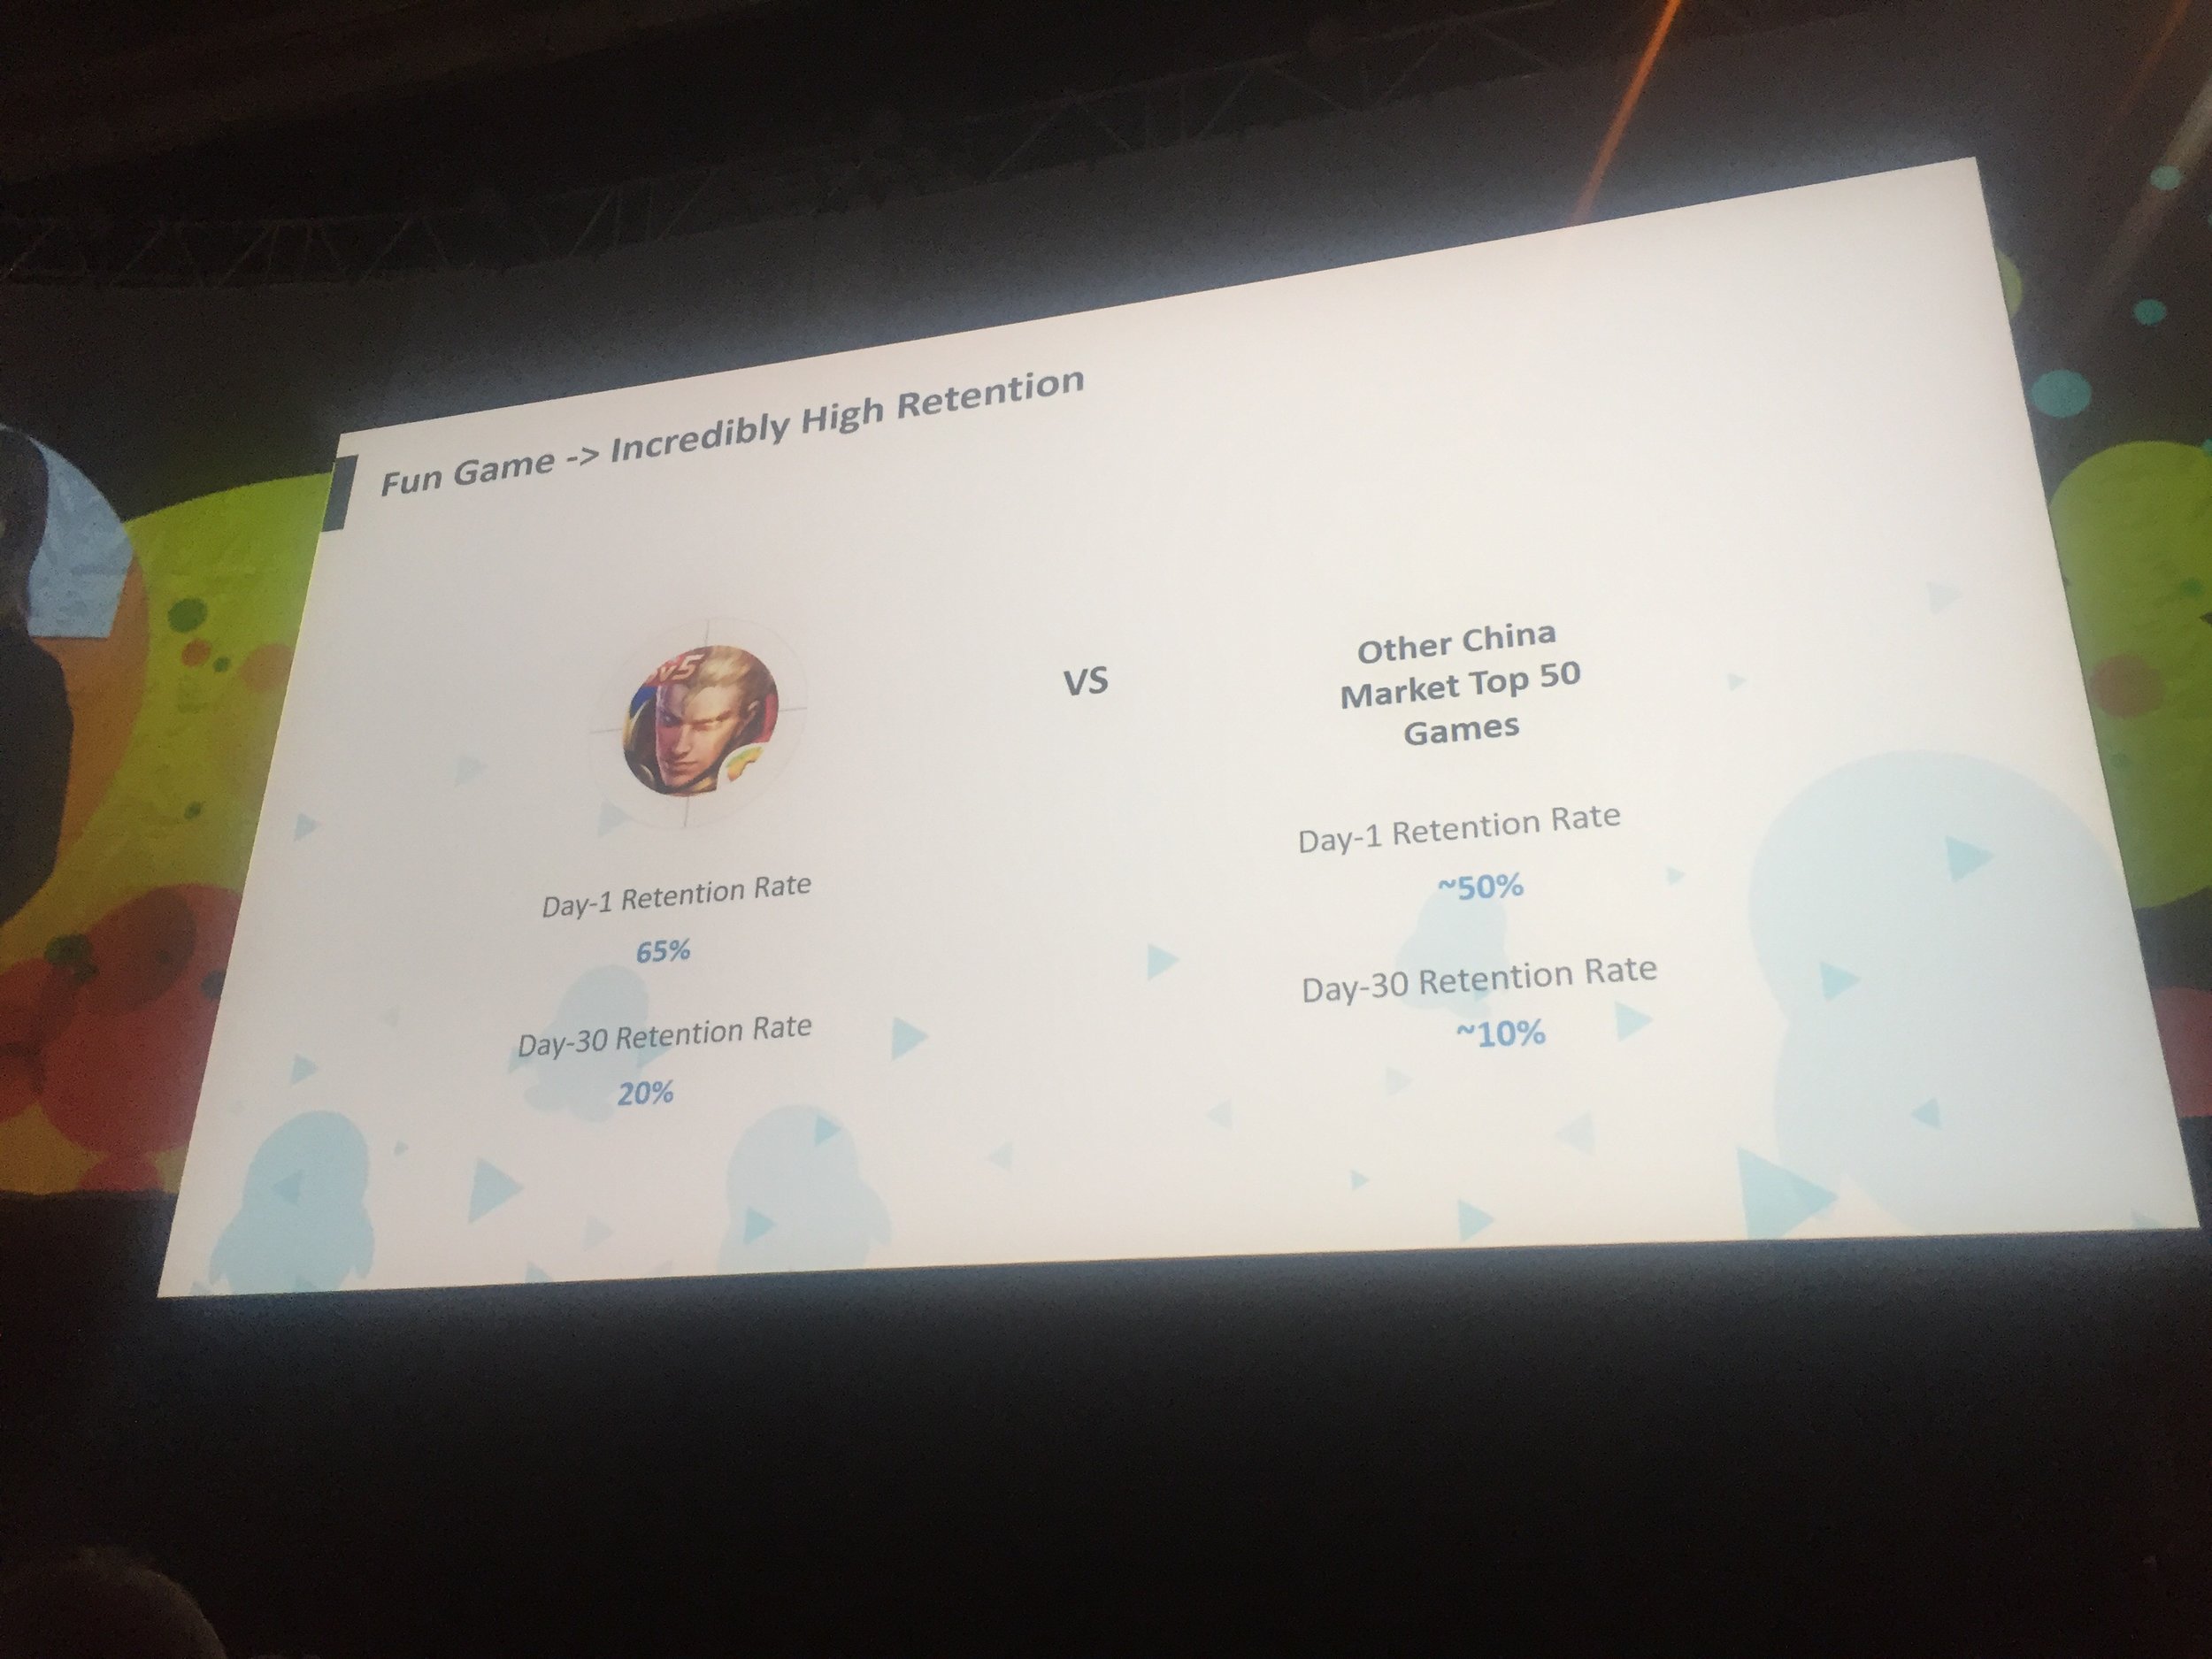 At the recent GameFirstHelsinki conference, Tencent revealed retention stats for the Chinese version of the game. As the game is so much fun, it results in an incredibly sticky app that retains players. Proof of the quality of the fun of the game an…